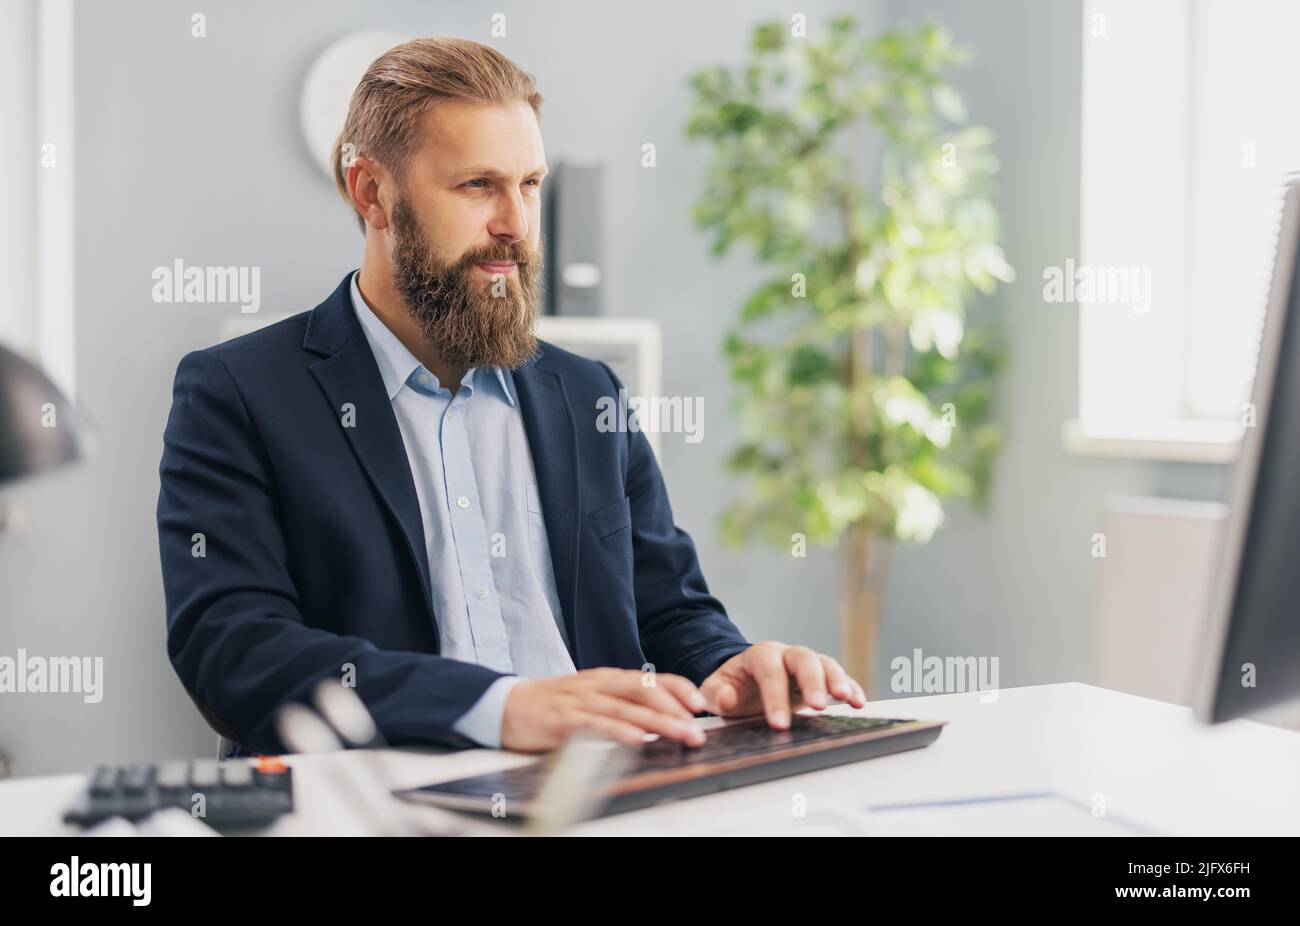 Successful businessman working on pc Stock Photo